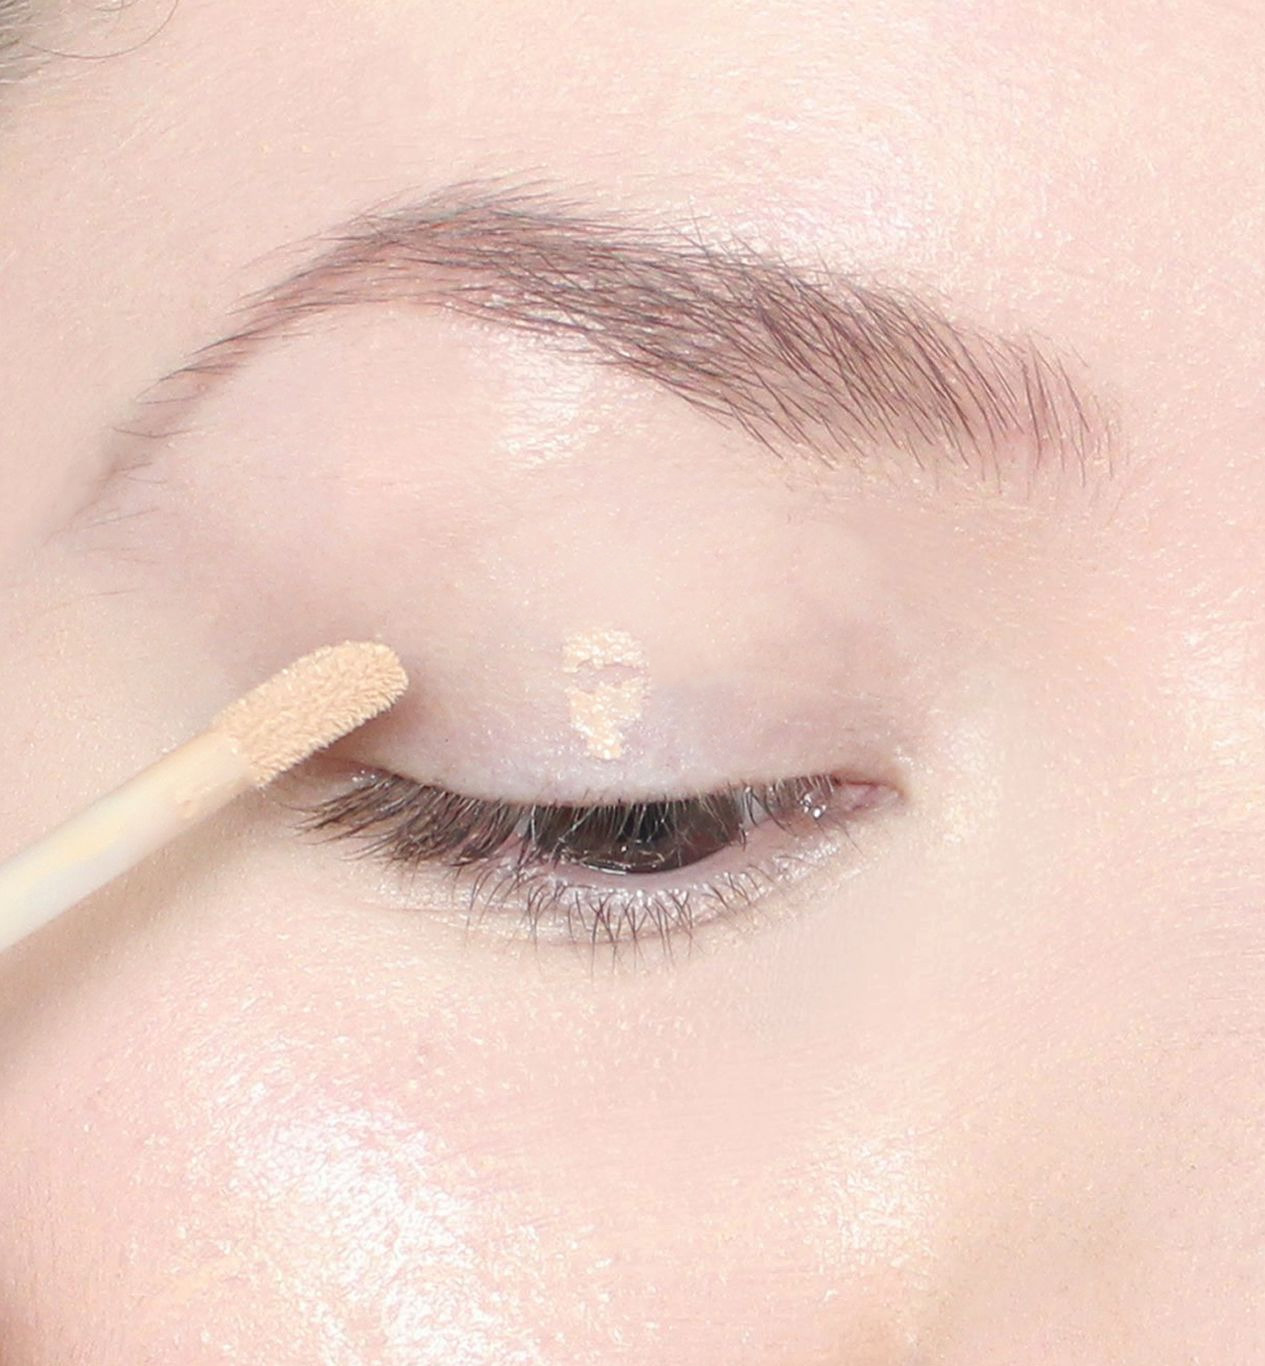 How to Use an Eye Primer for Eyeshadow